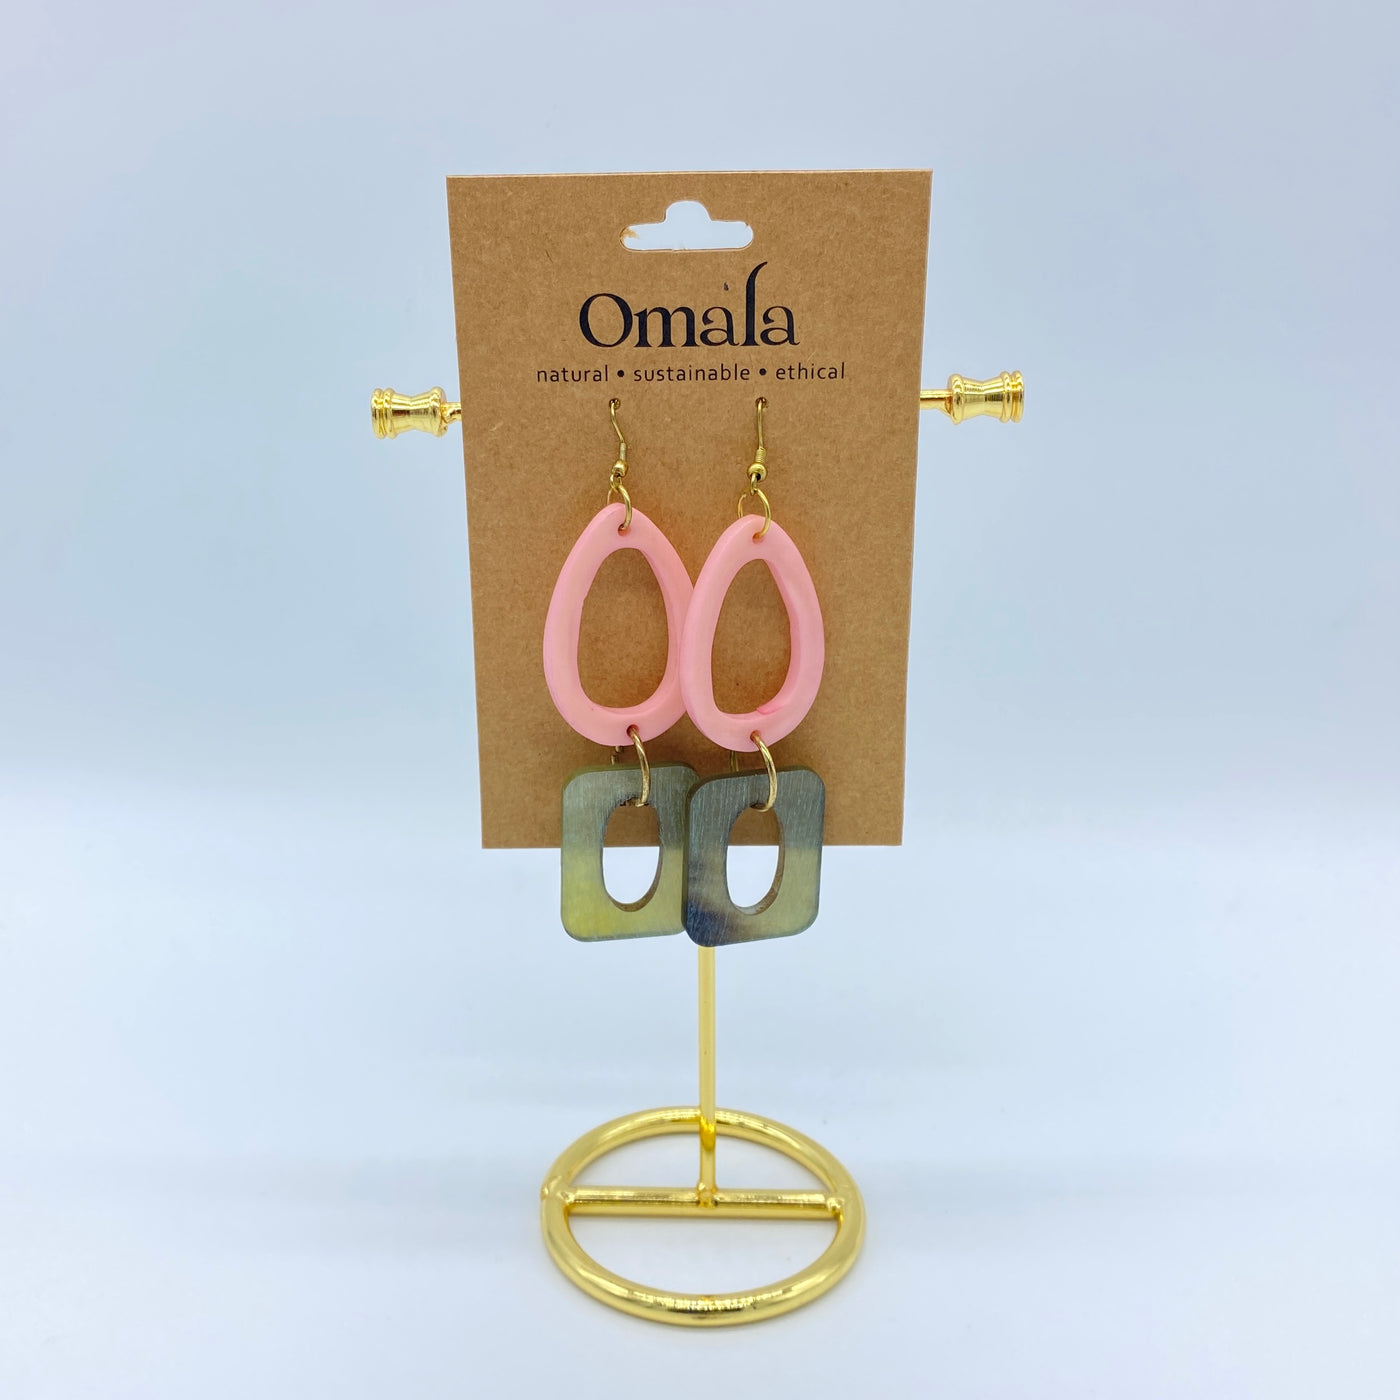 Omala Collection by Anju